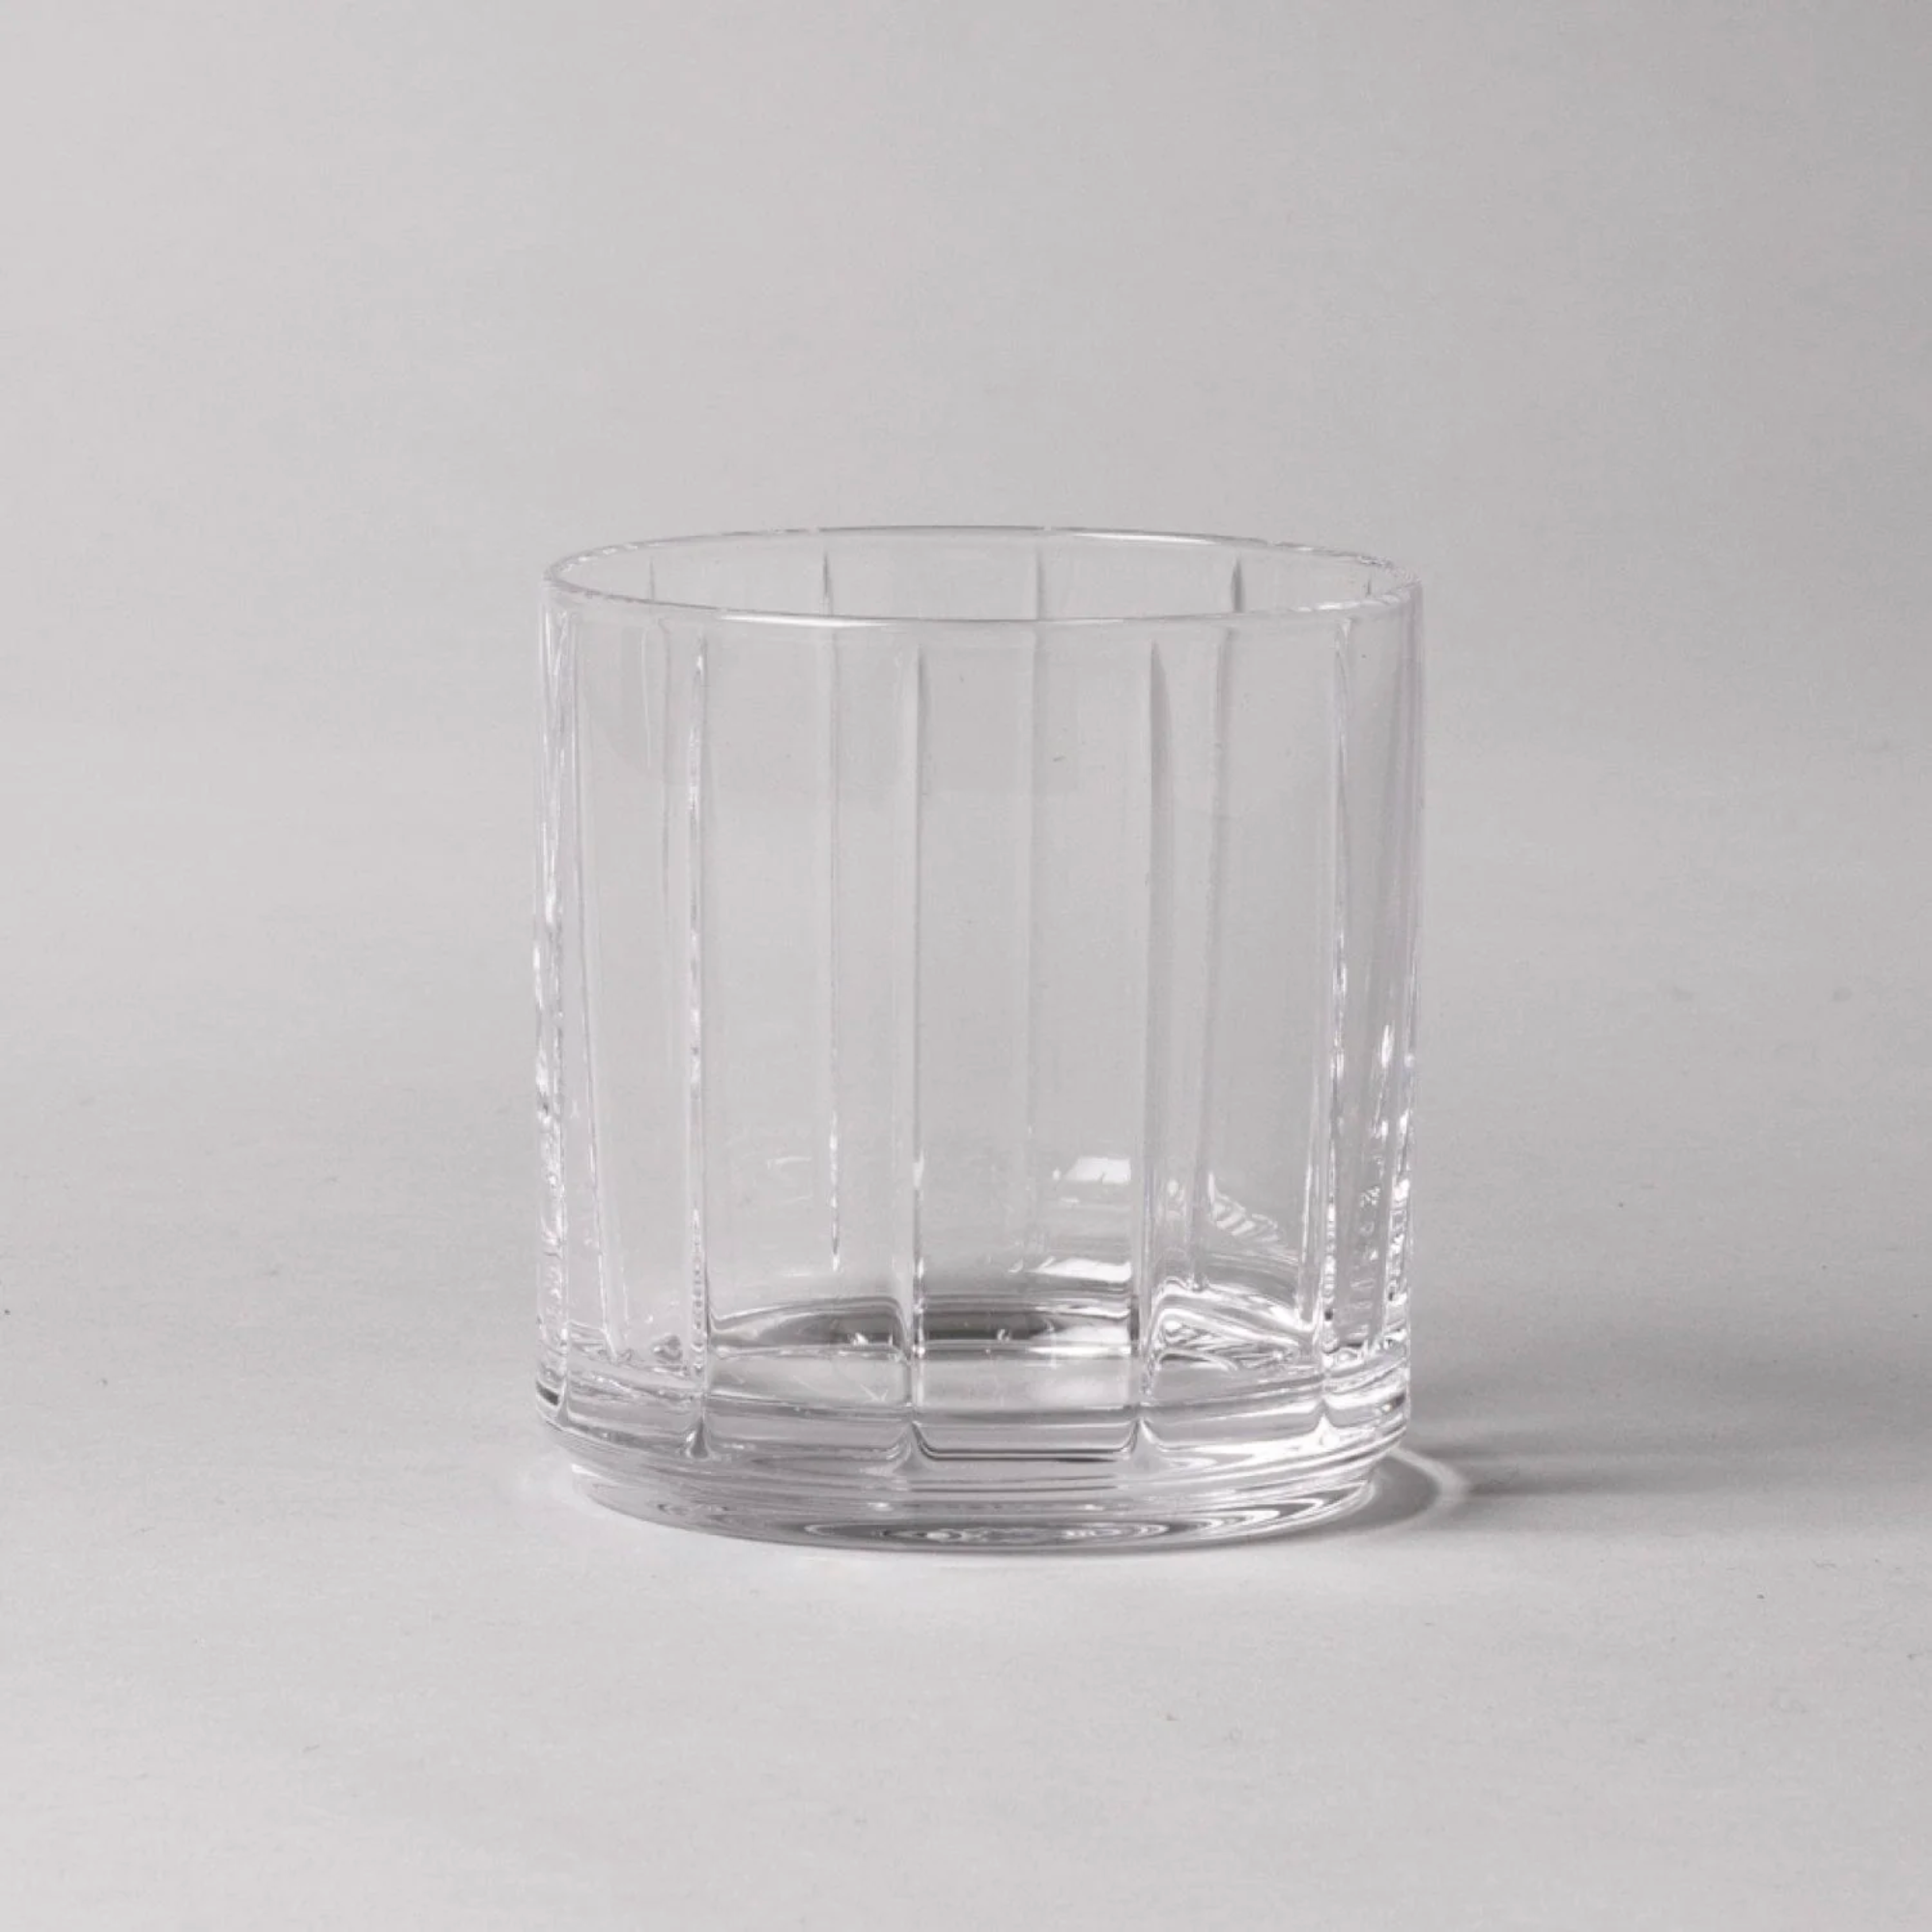 Fable The Rocks Glasses - Set of 4